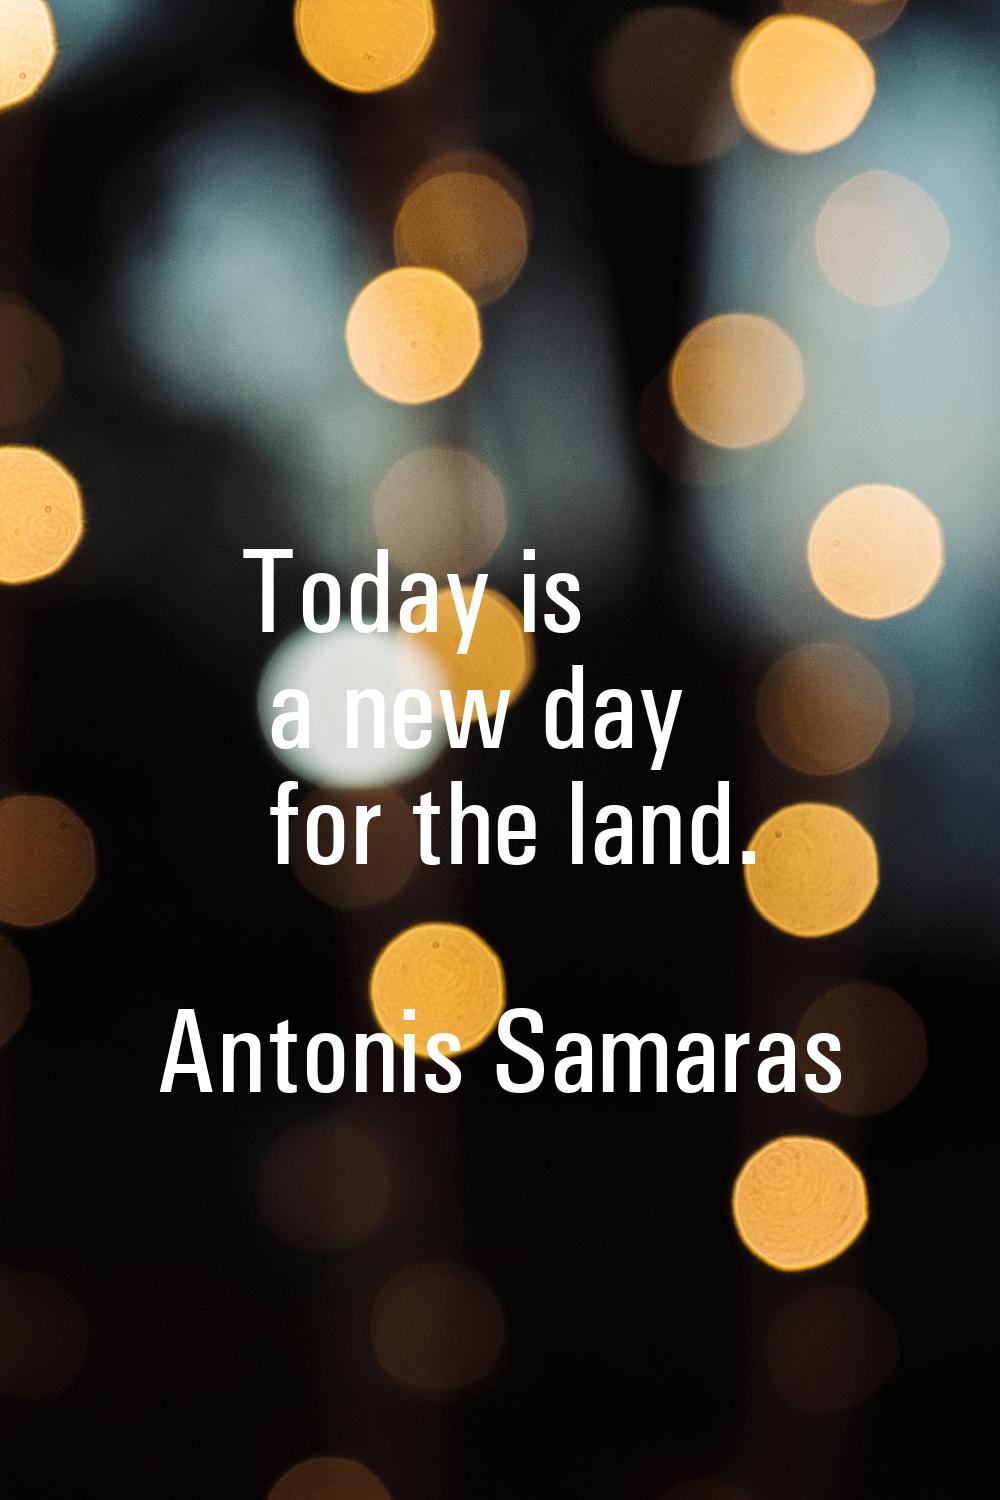 Today is a new day for the land.